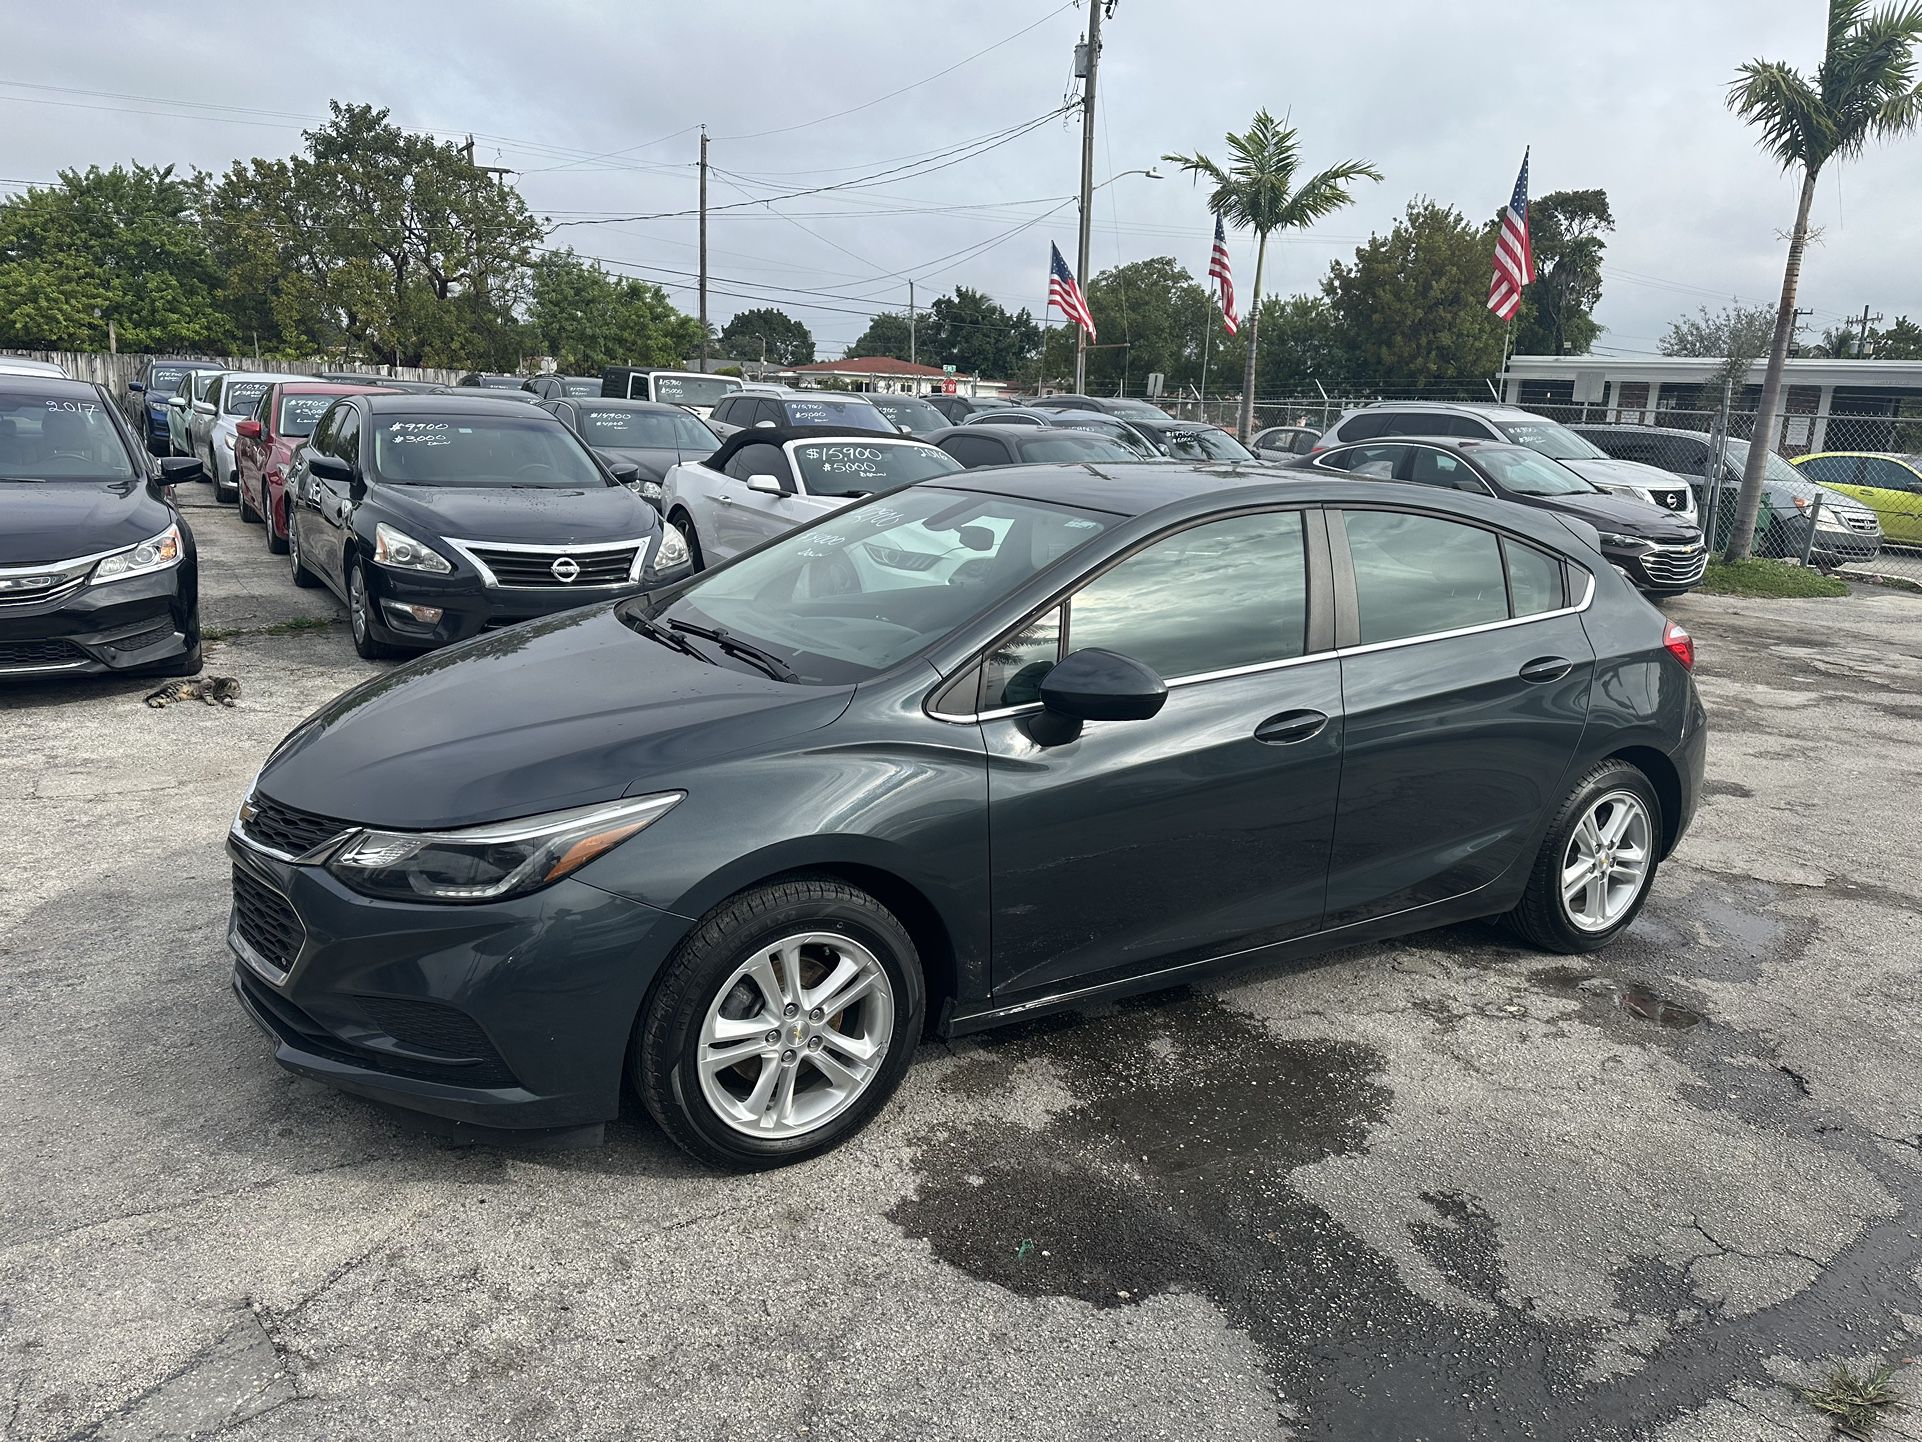 used 2018 chevrolet cruze - front view 2